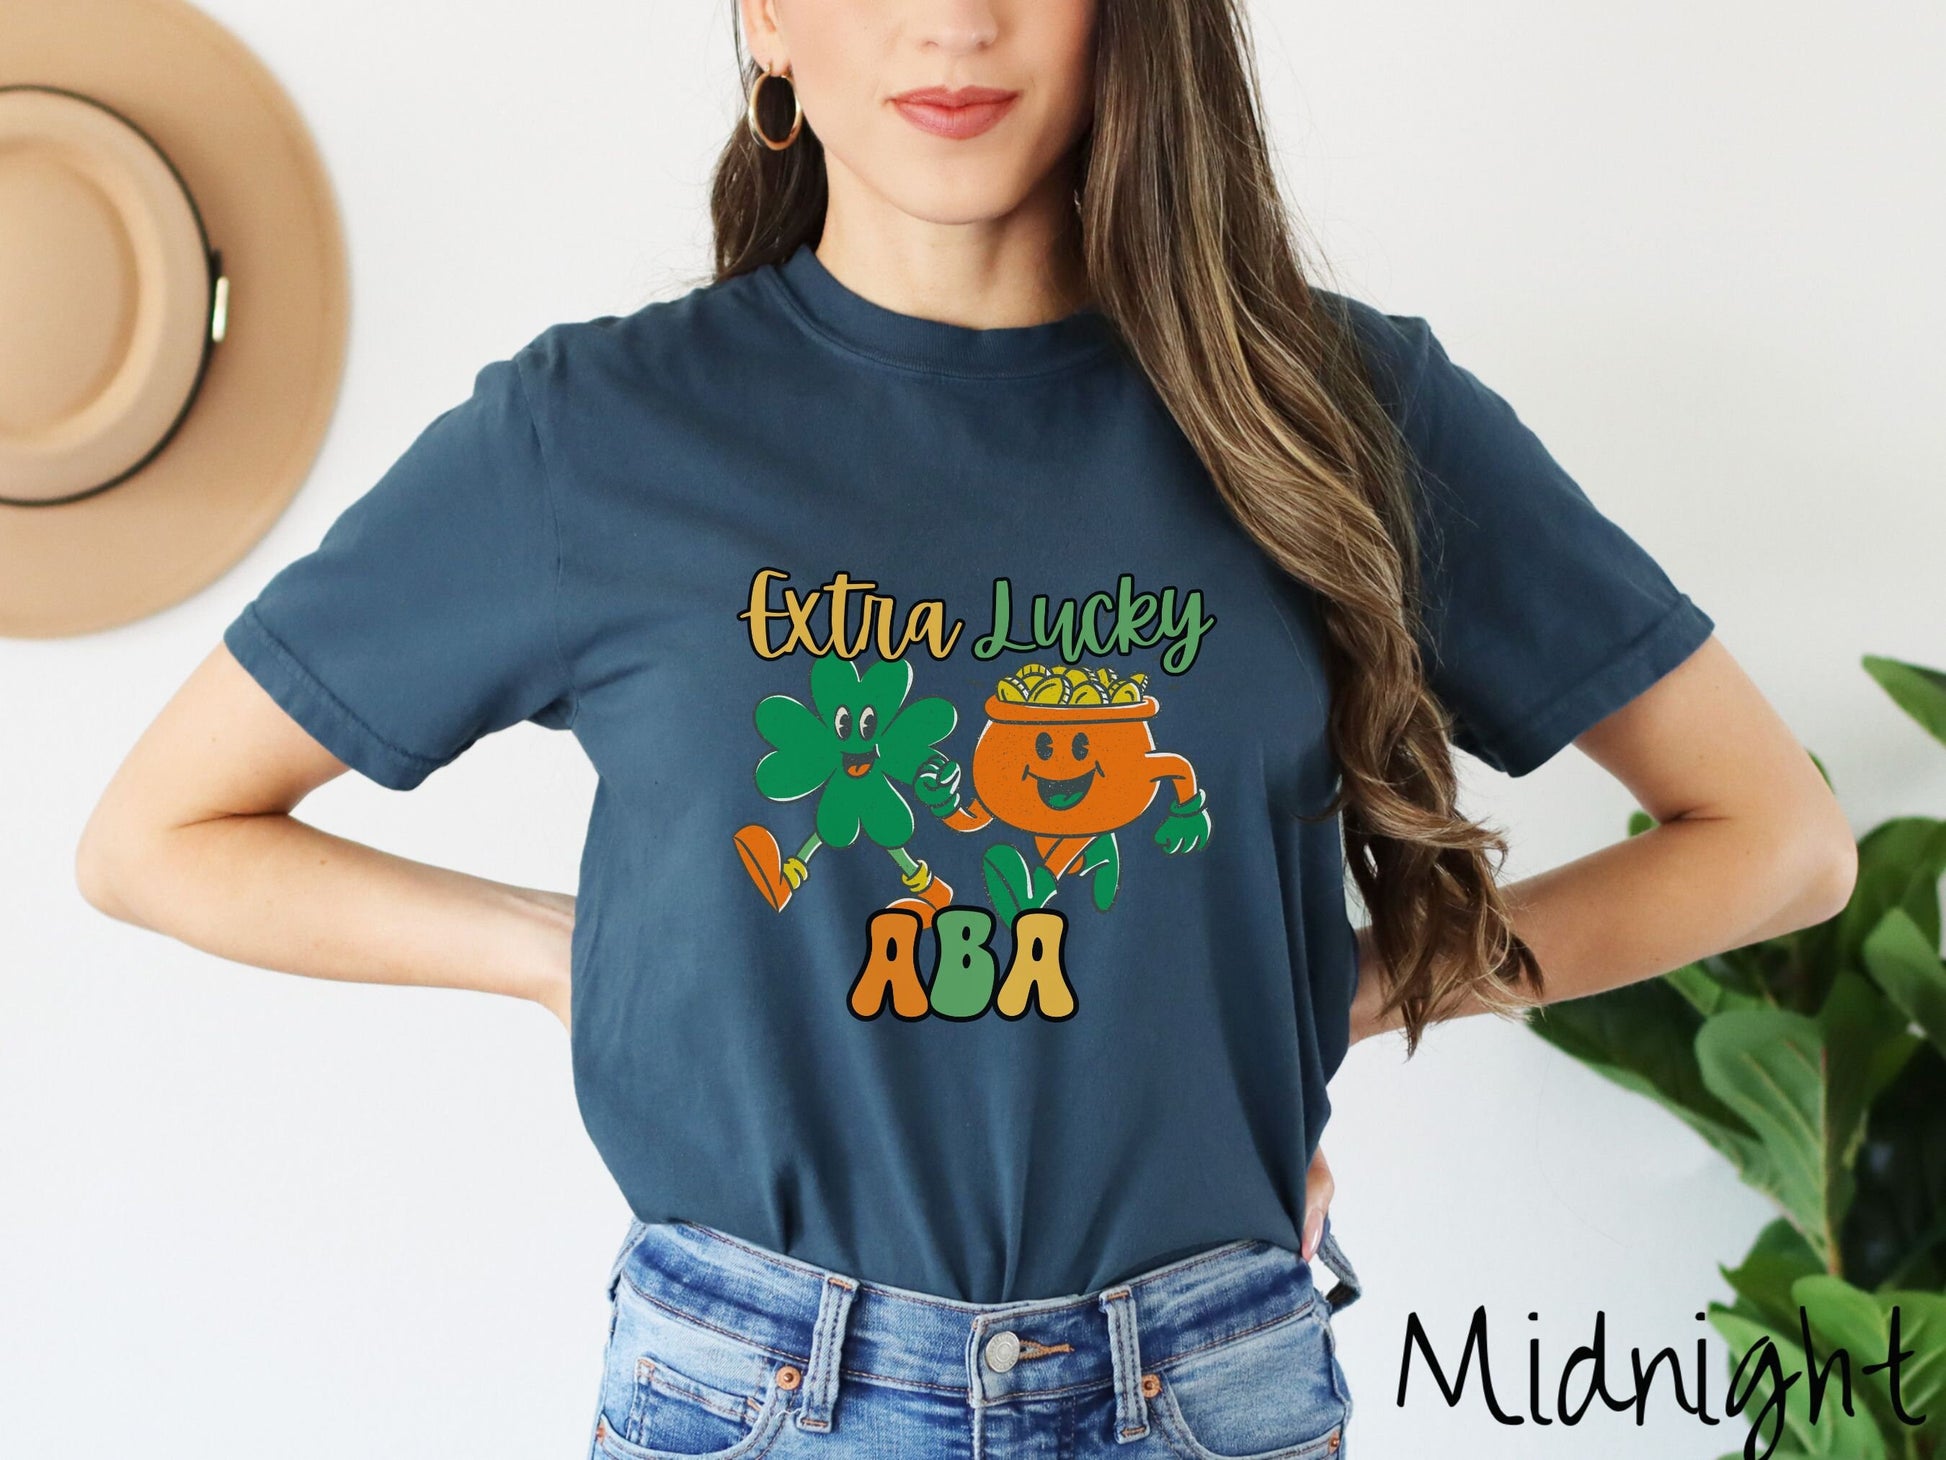 A woman wearing a vintage, midnight colored shirt with the text Extra Lucky ABA in yellow, orange, and green font. Between the text are a green clover and orange pot of gold smiling and walking together in step.